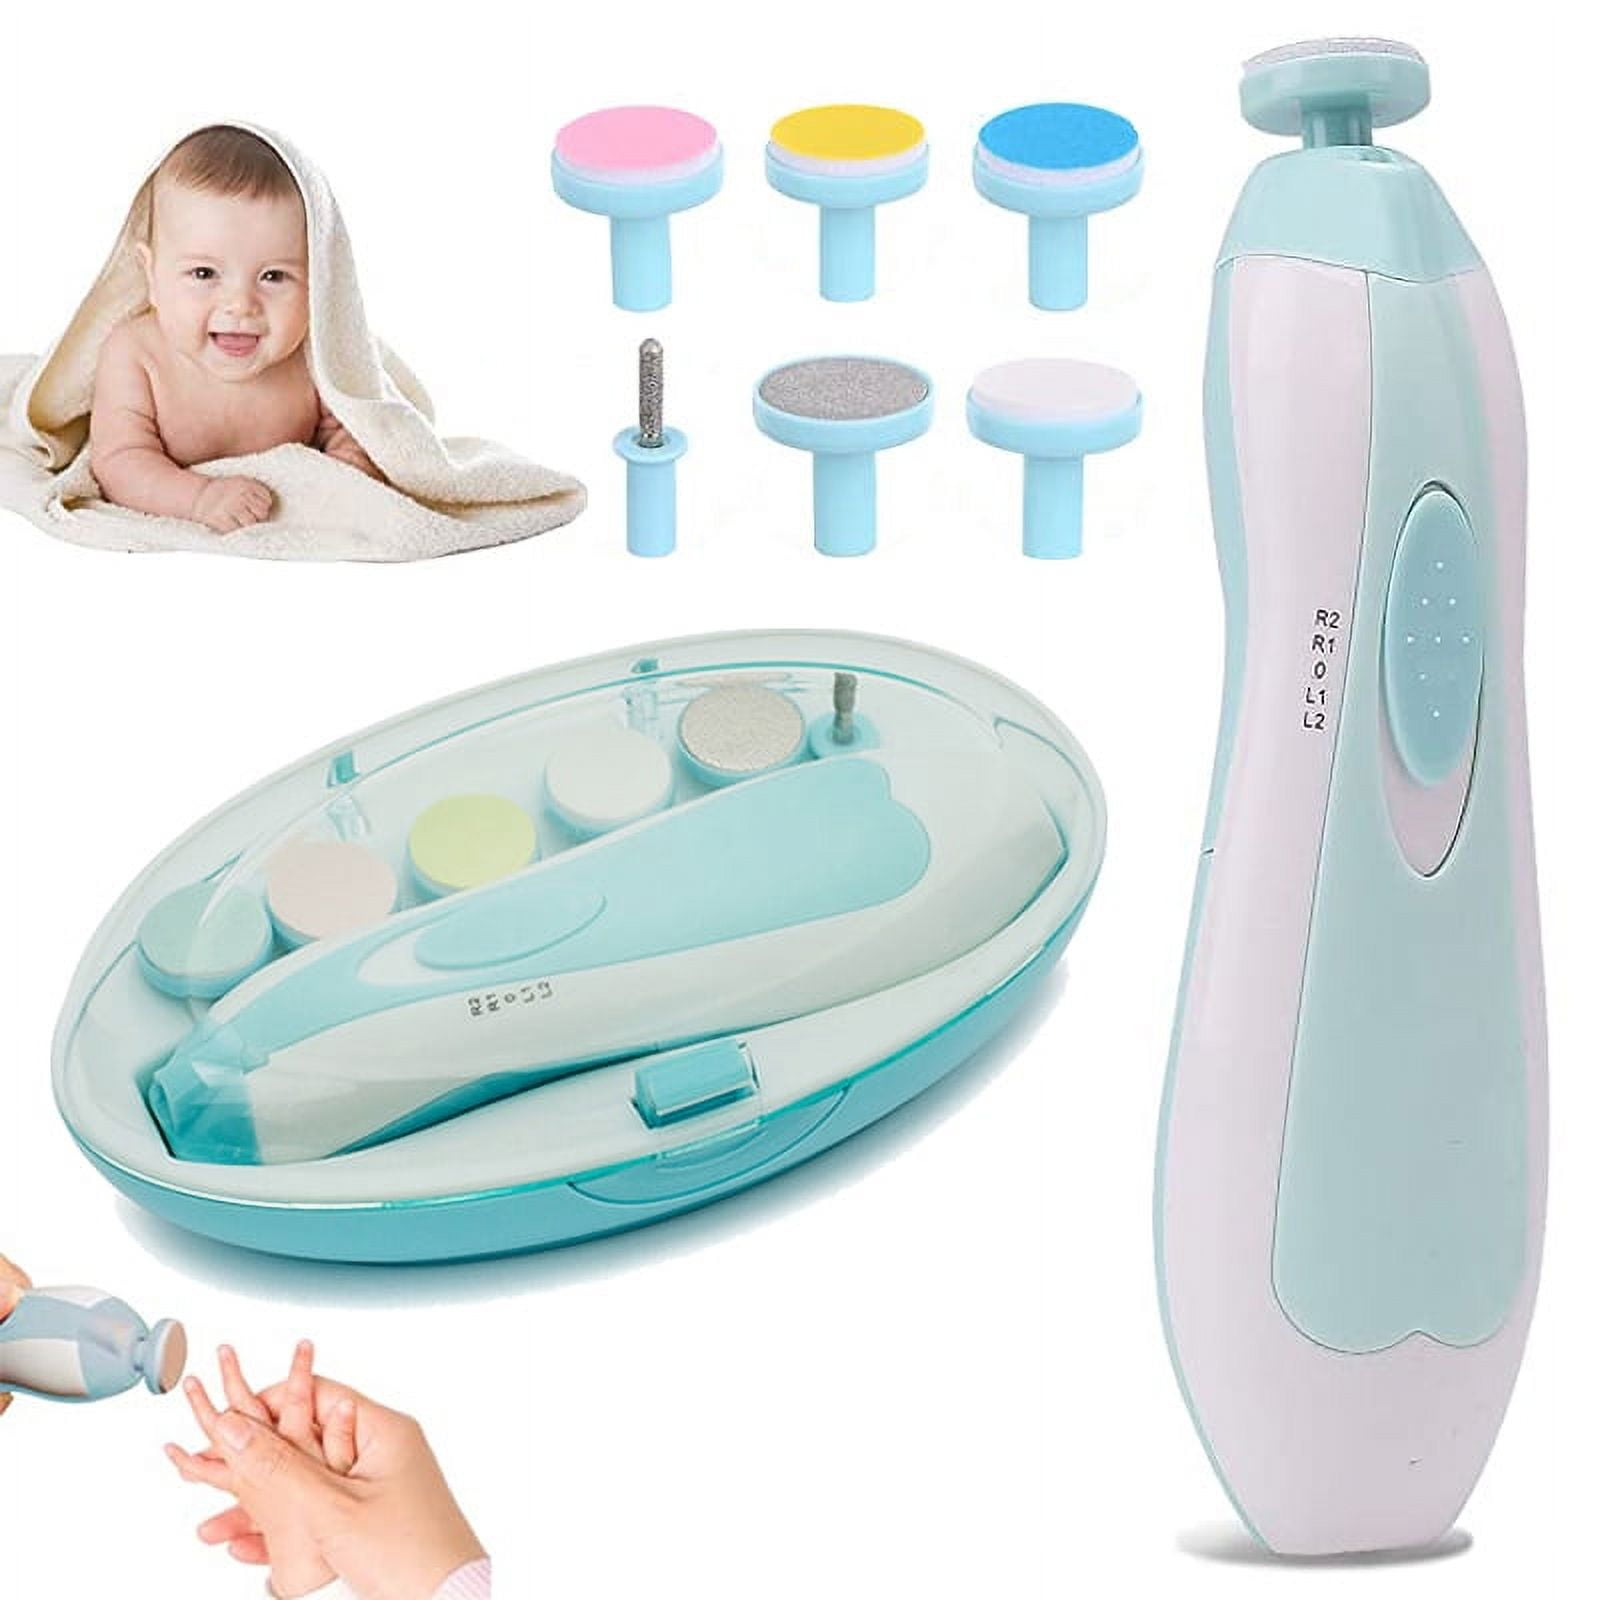 OBOSOE 6 in 1 Baby Nail Clippers Baby Electric Nail Designs Baby Nail File Kit Newborn Finger and Toenails Fit And Polish Infant Products 25b53c6e 9d36 4fbe a949 52eccd127db6.8b0022b319018543599ce79f99047252